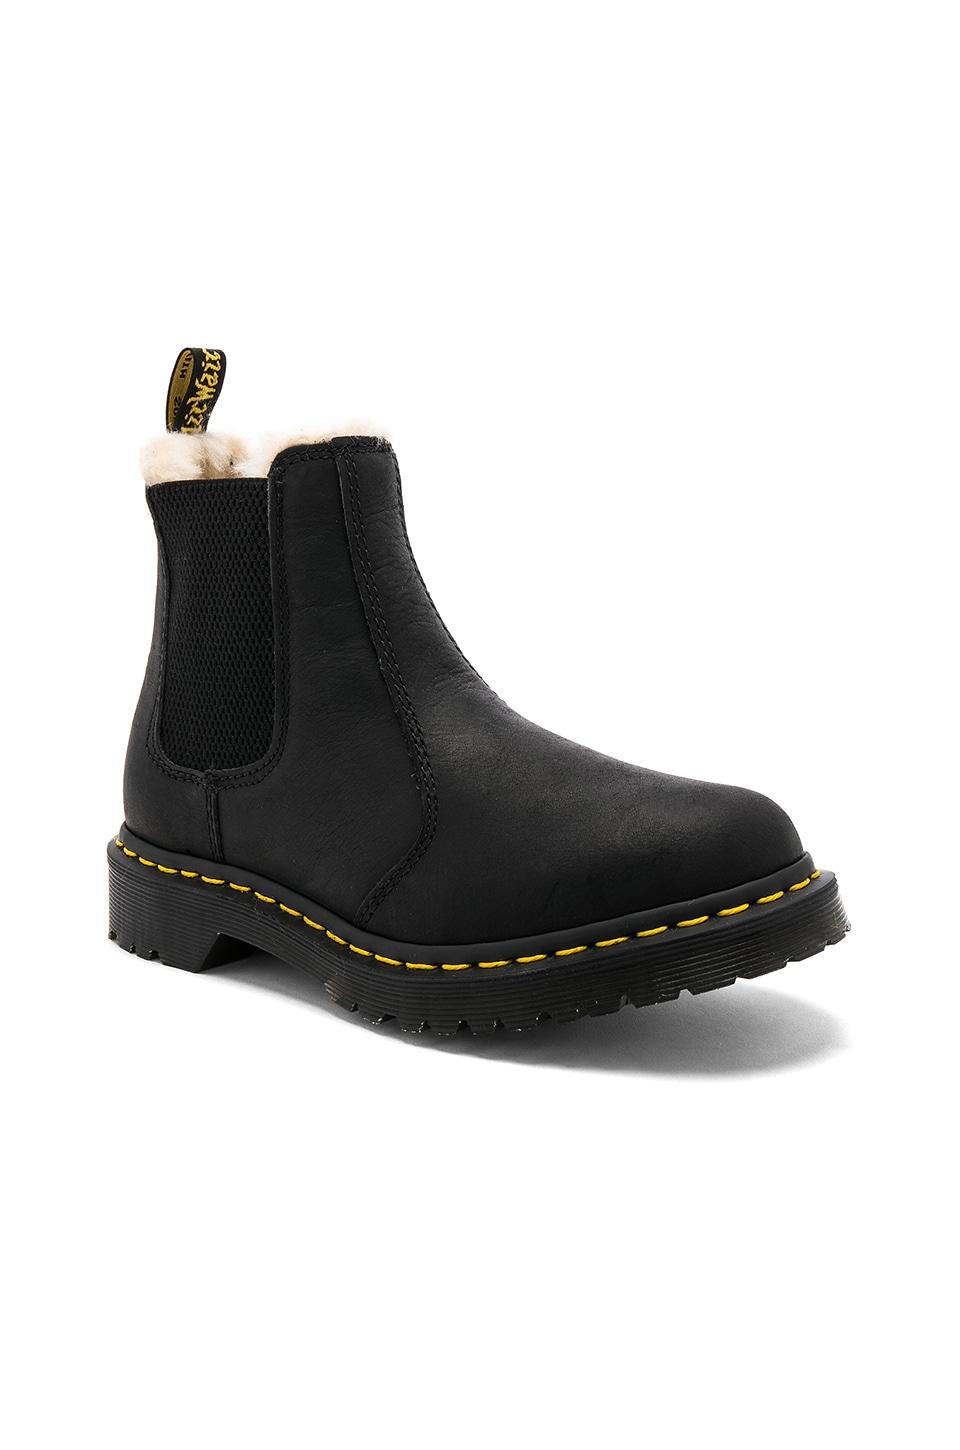 Dr. Martens Leonore Faux Fur Lined Chelsea Boot in Black - Save 82% - Lyst